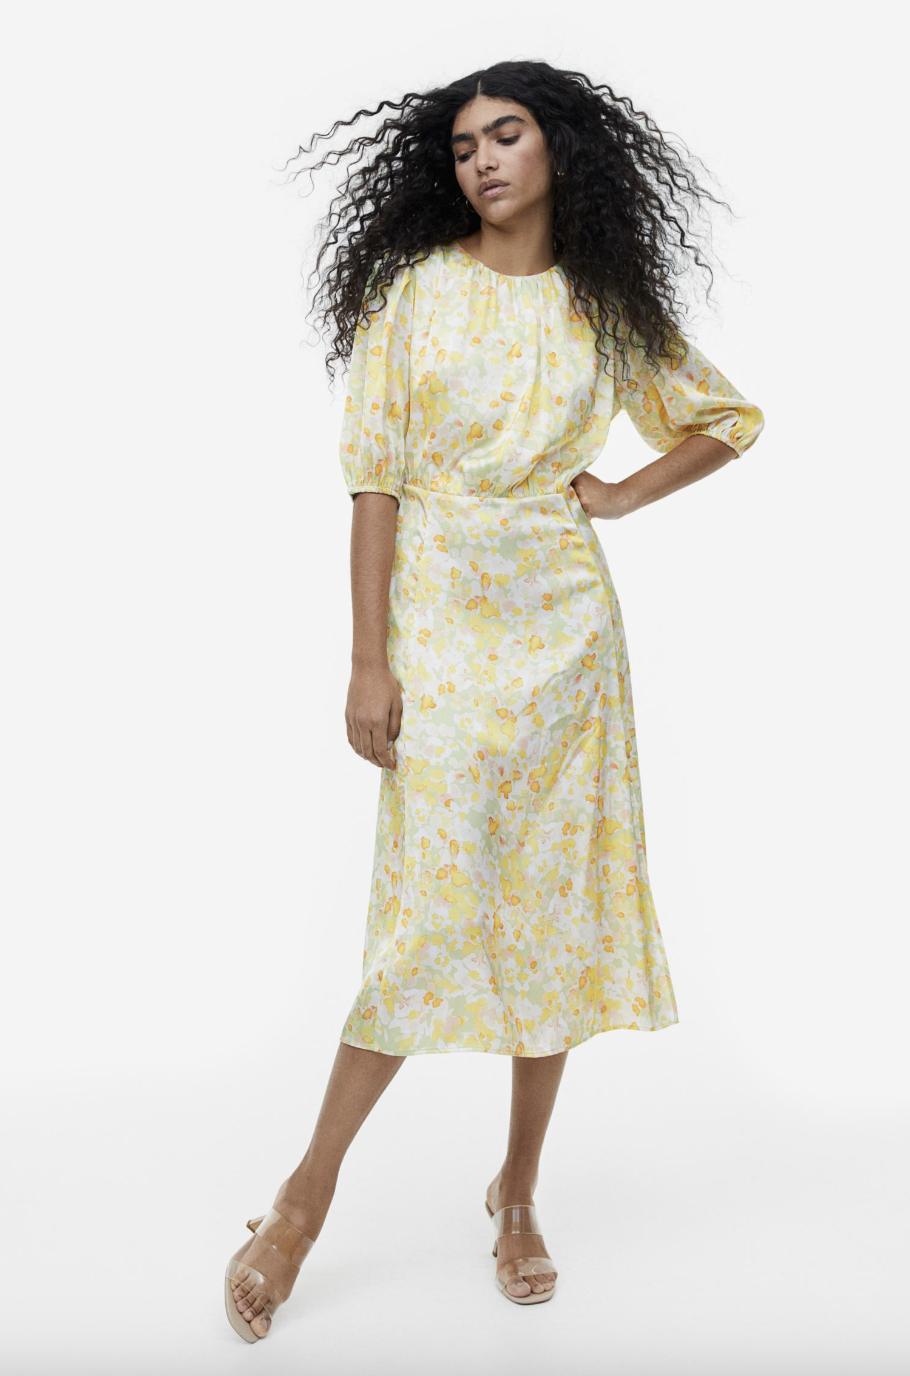 model with long black hair wearing pale yellow  floral Gathered Dress (photo via H&M)